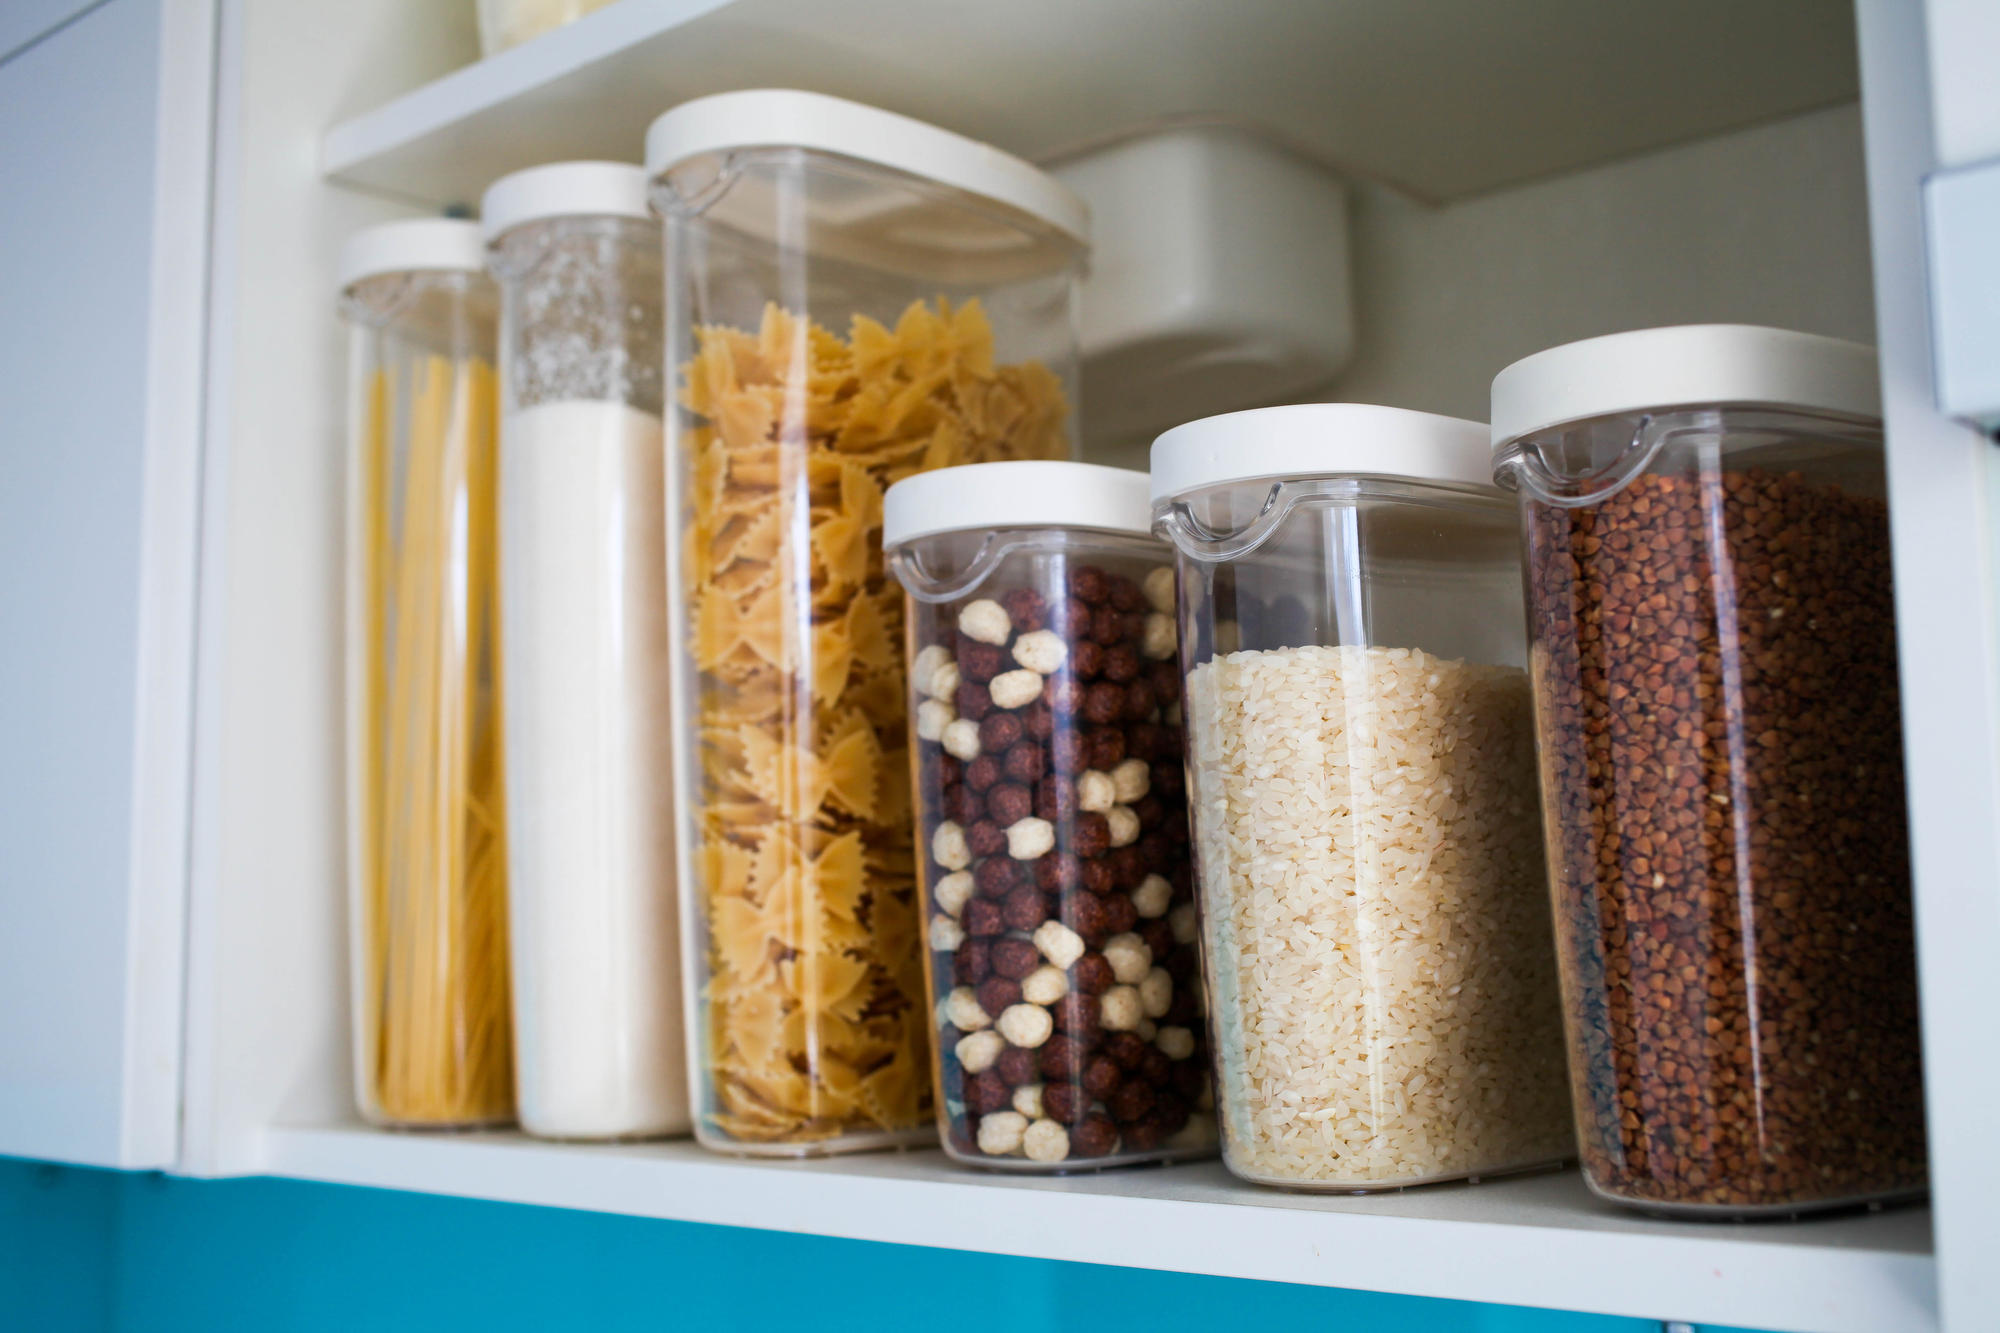 Rice storage suggestions?